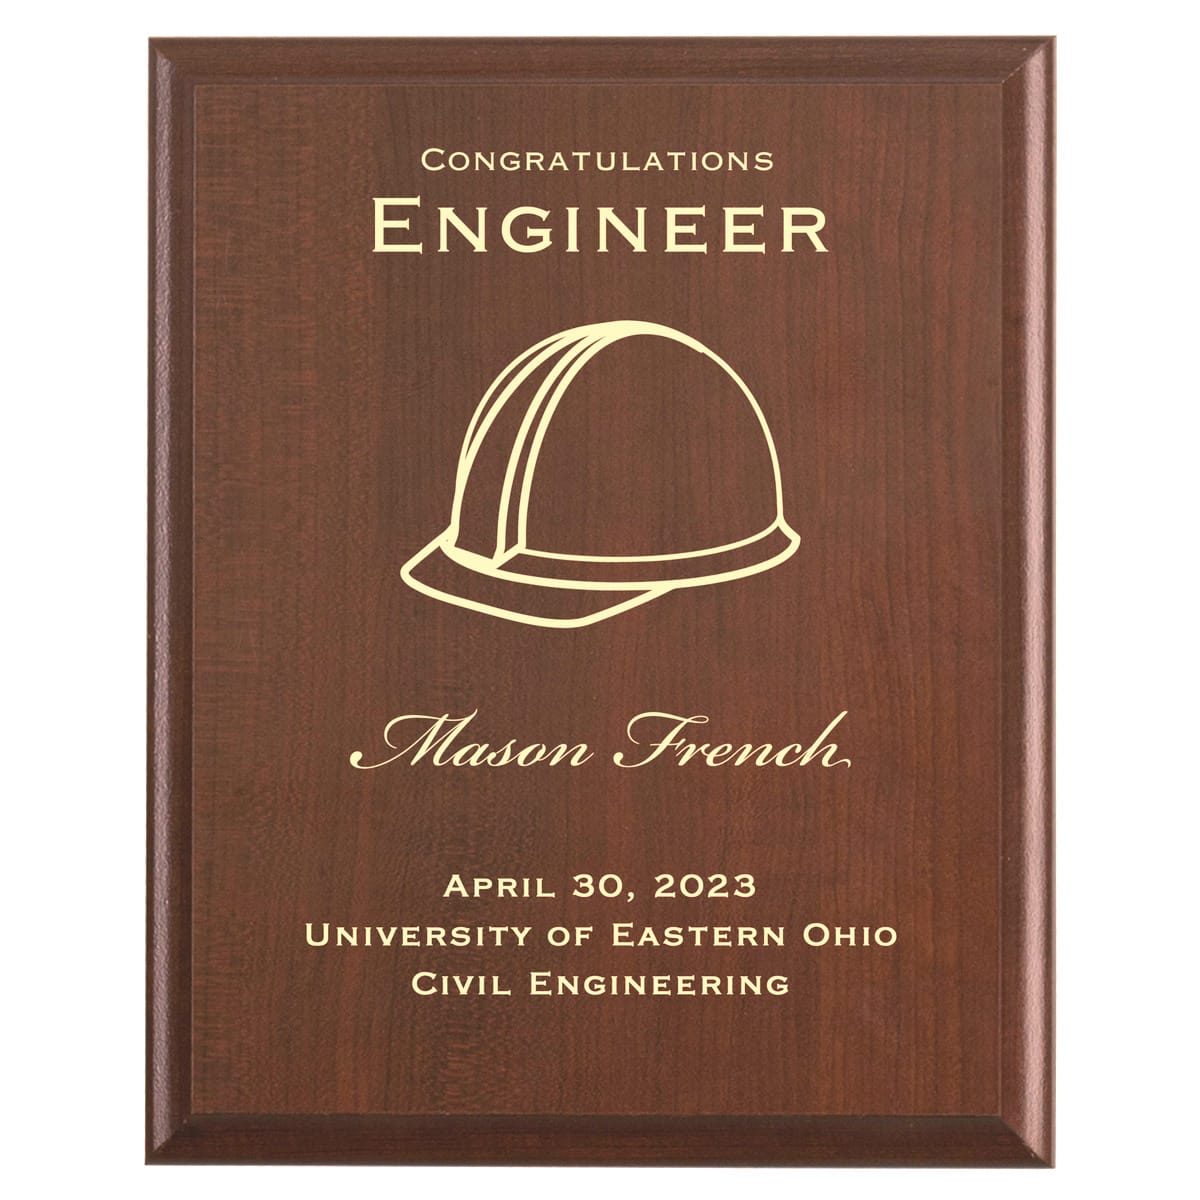 Plaque photo: Hard Hat Ceremony Commemorative Plaque for Engineers design with free personalization. Wood style finish with customized text.